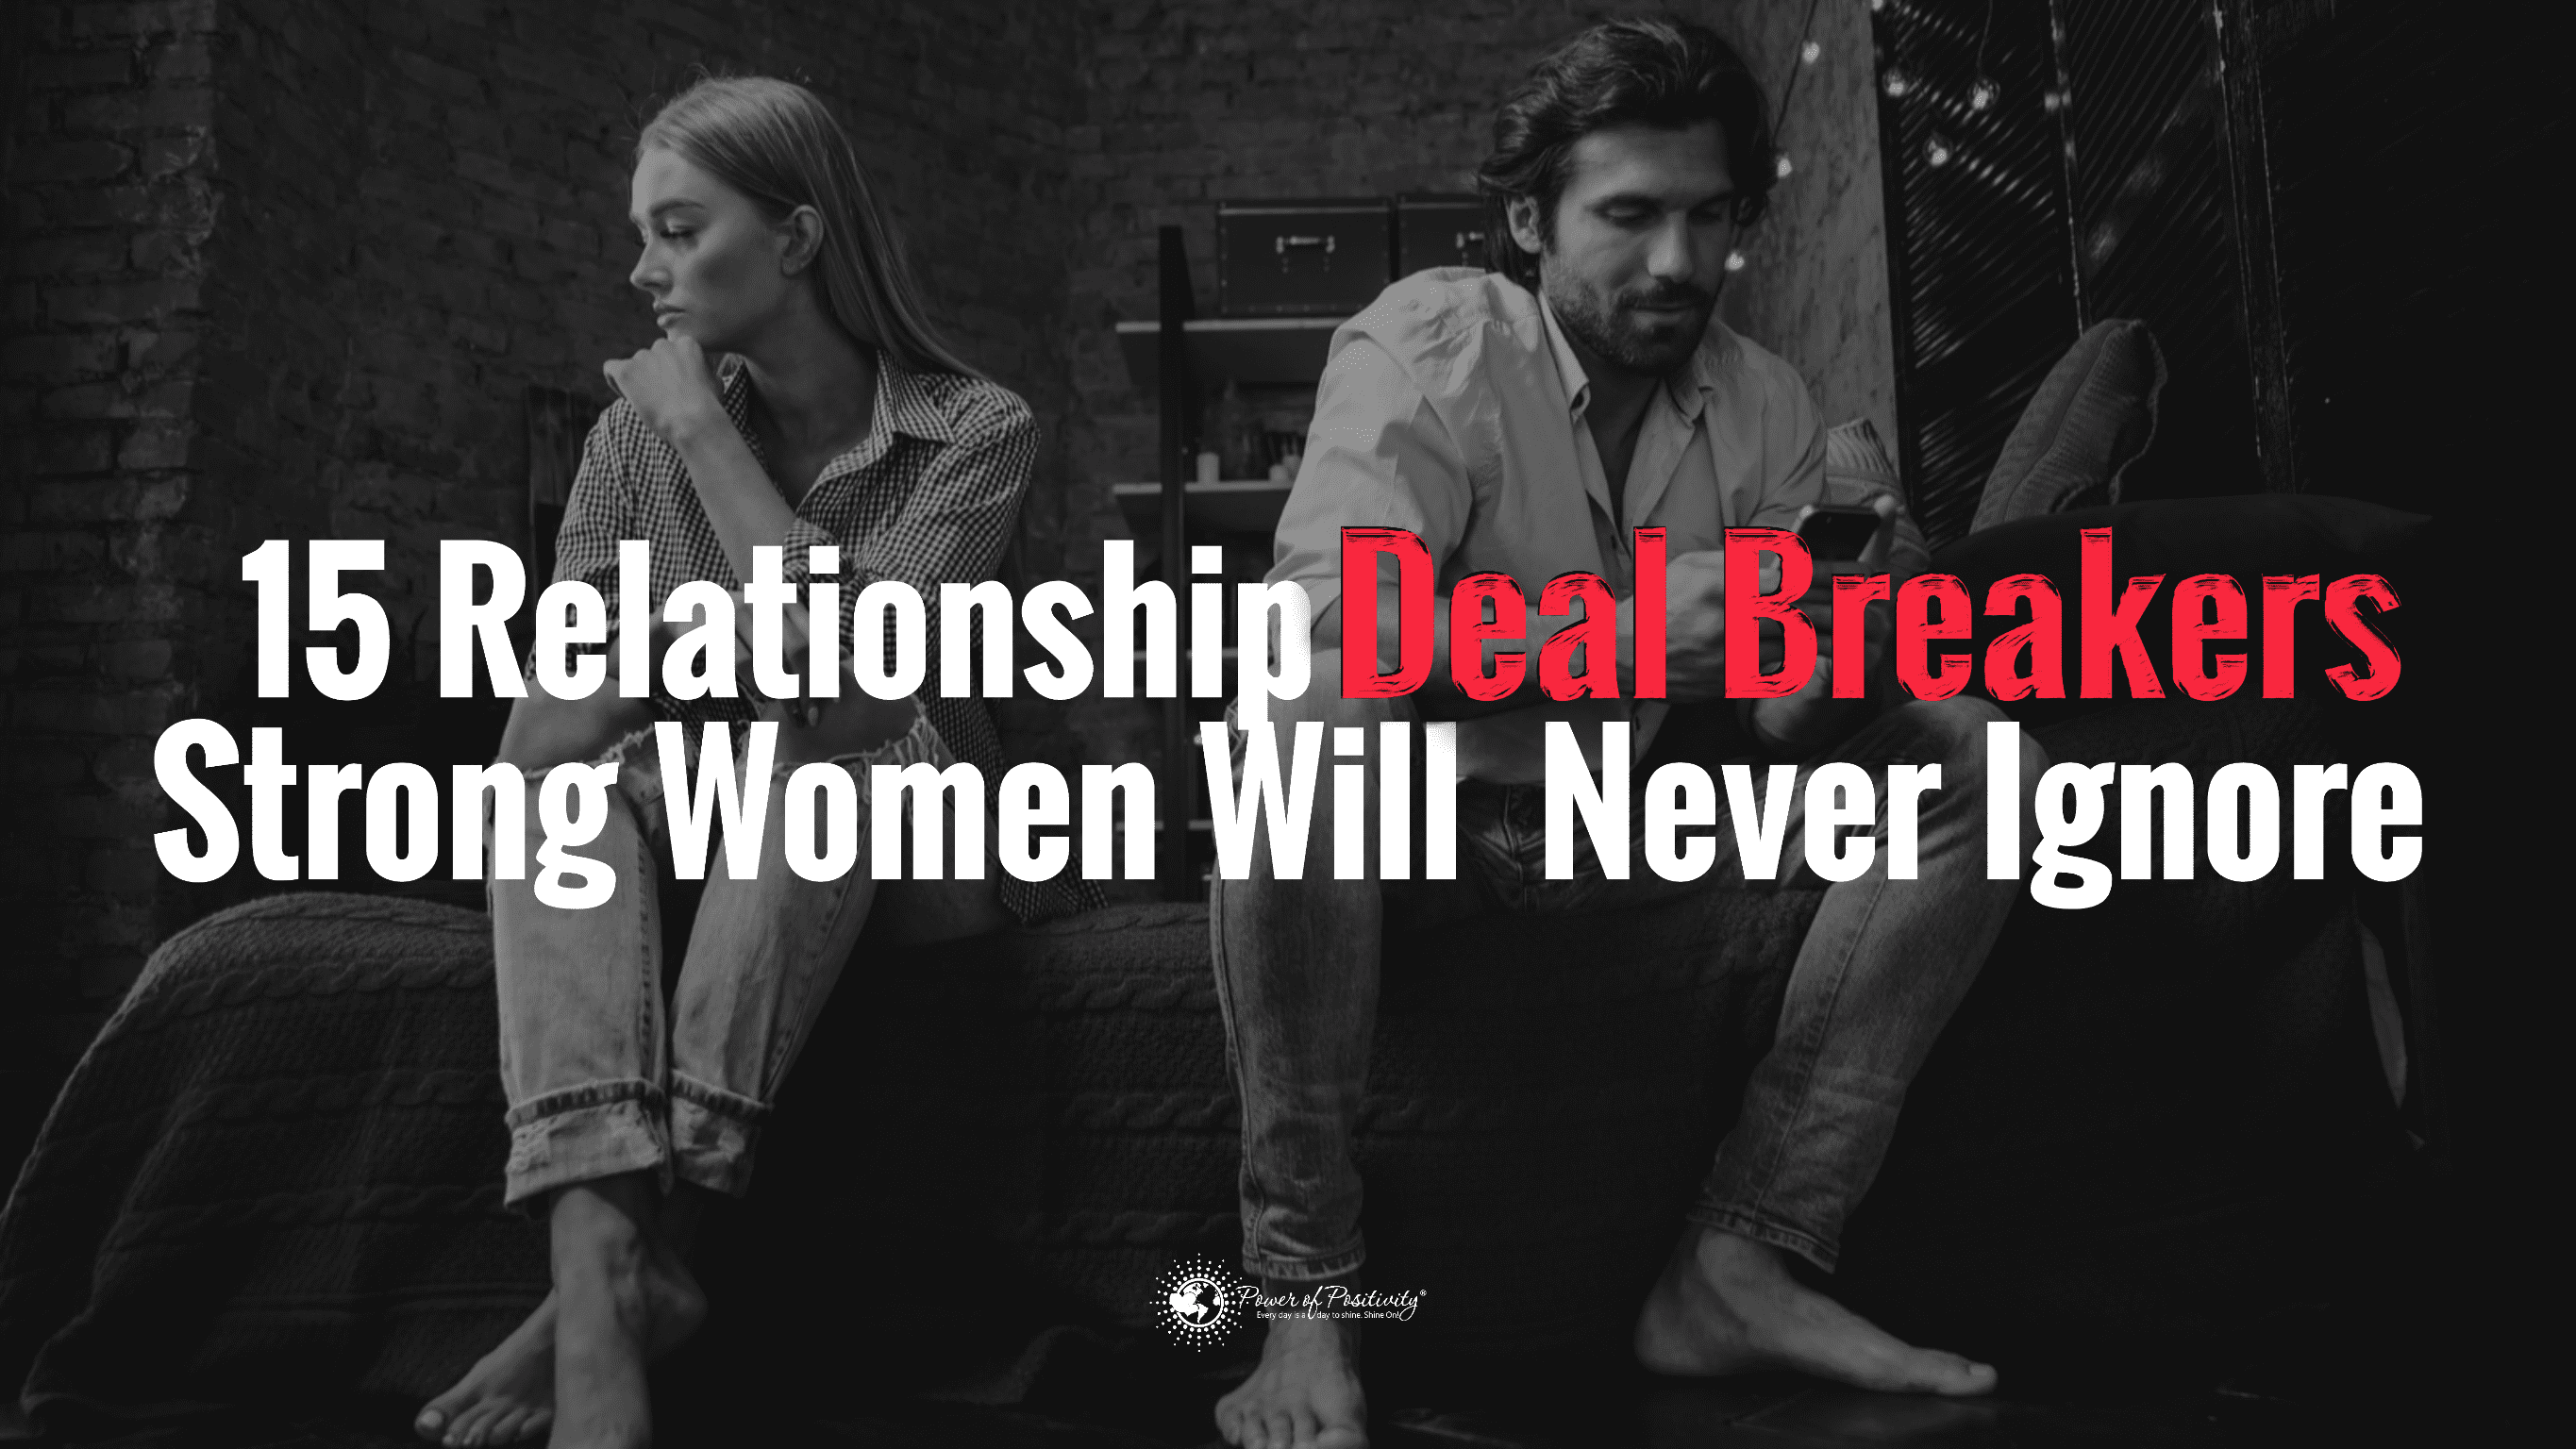 15 Relationship Deal Breakers Strong Women Will Never Ignore